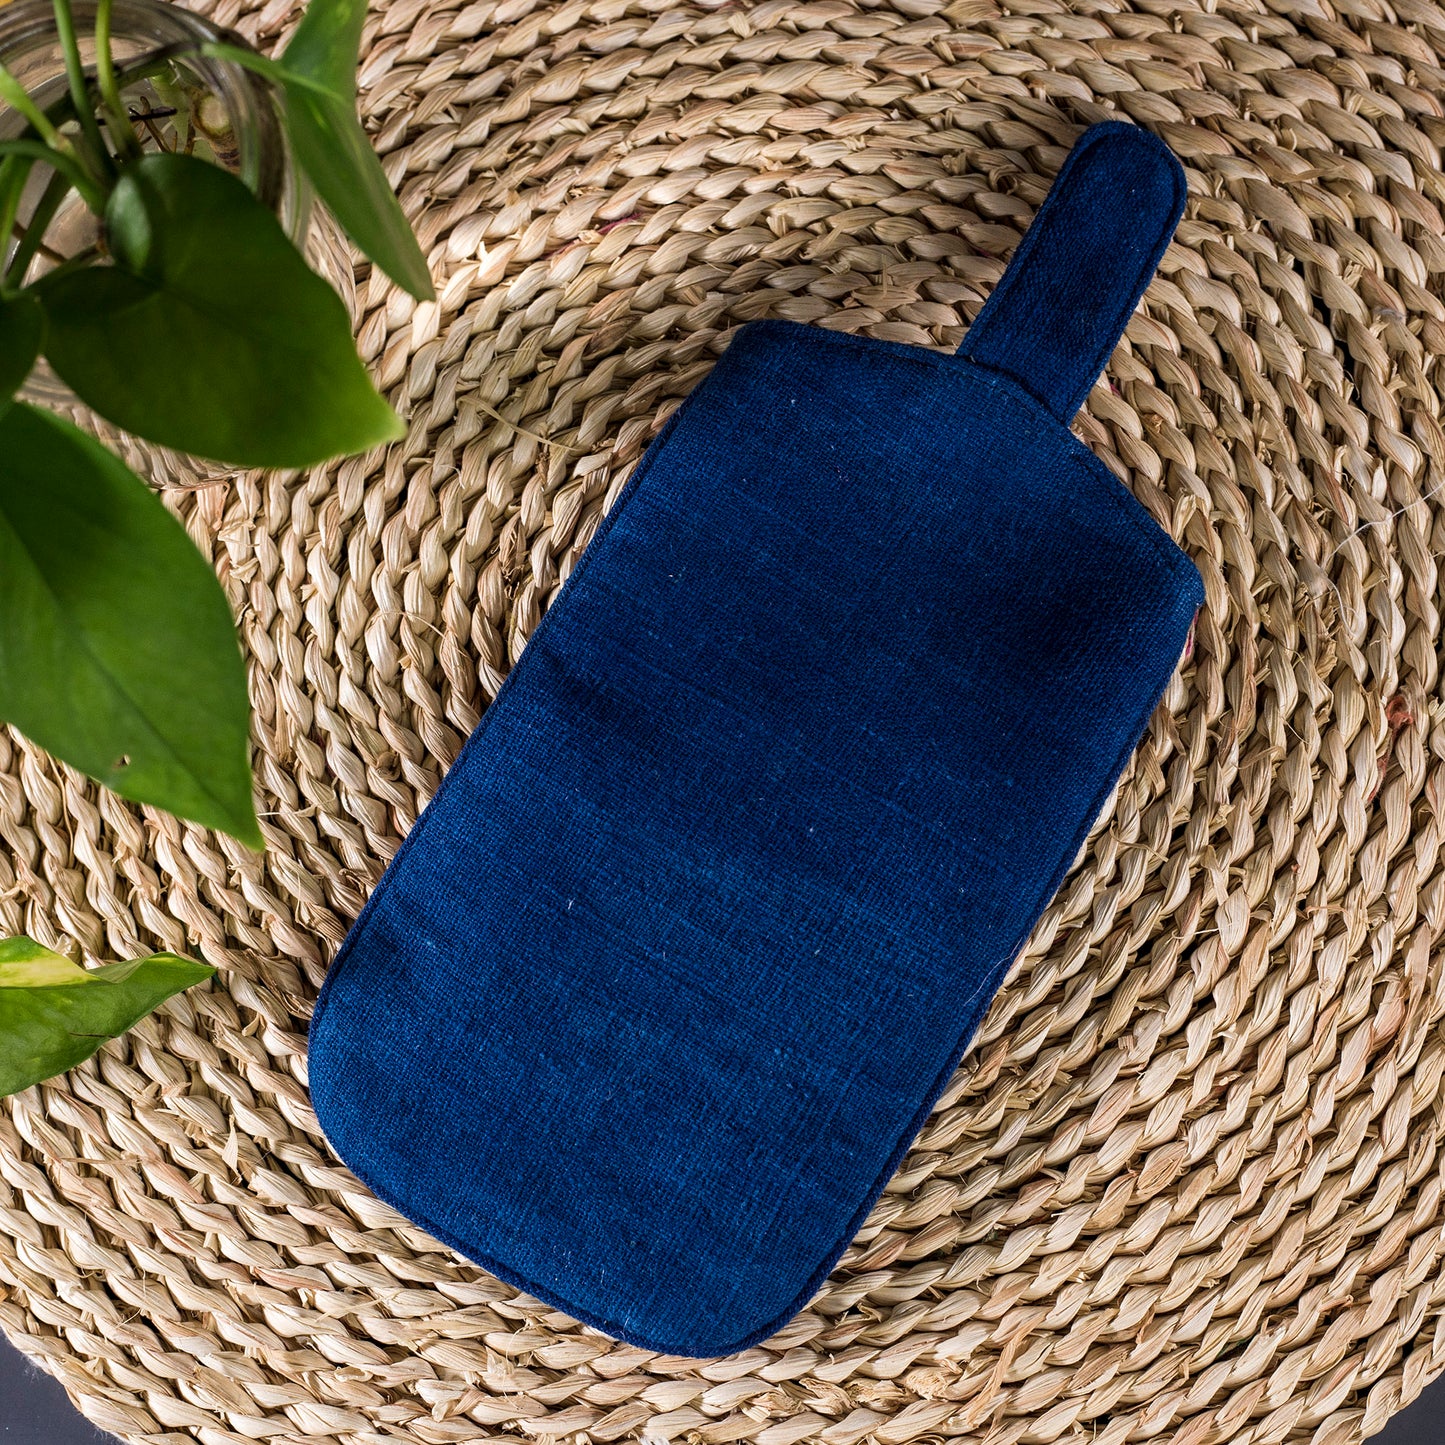 Phone case / glass case in hand-woven tribal fabrics, light absorption layer